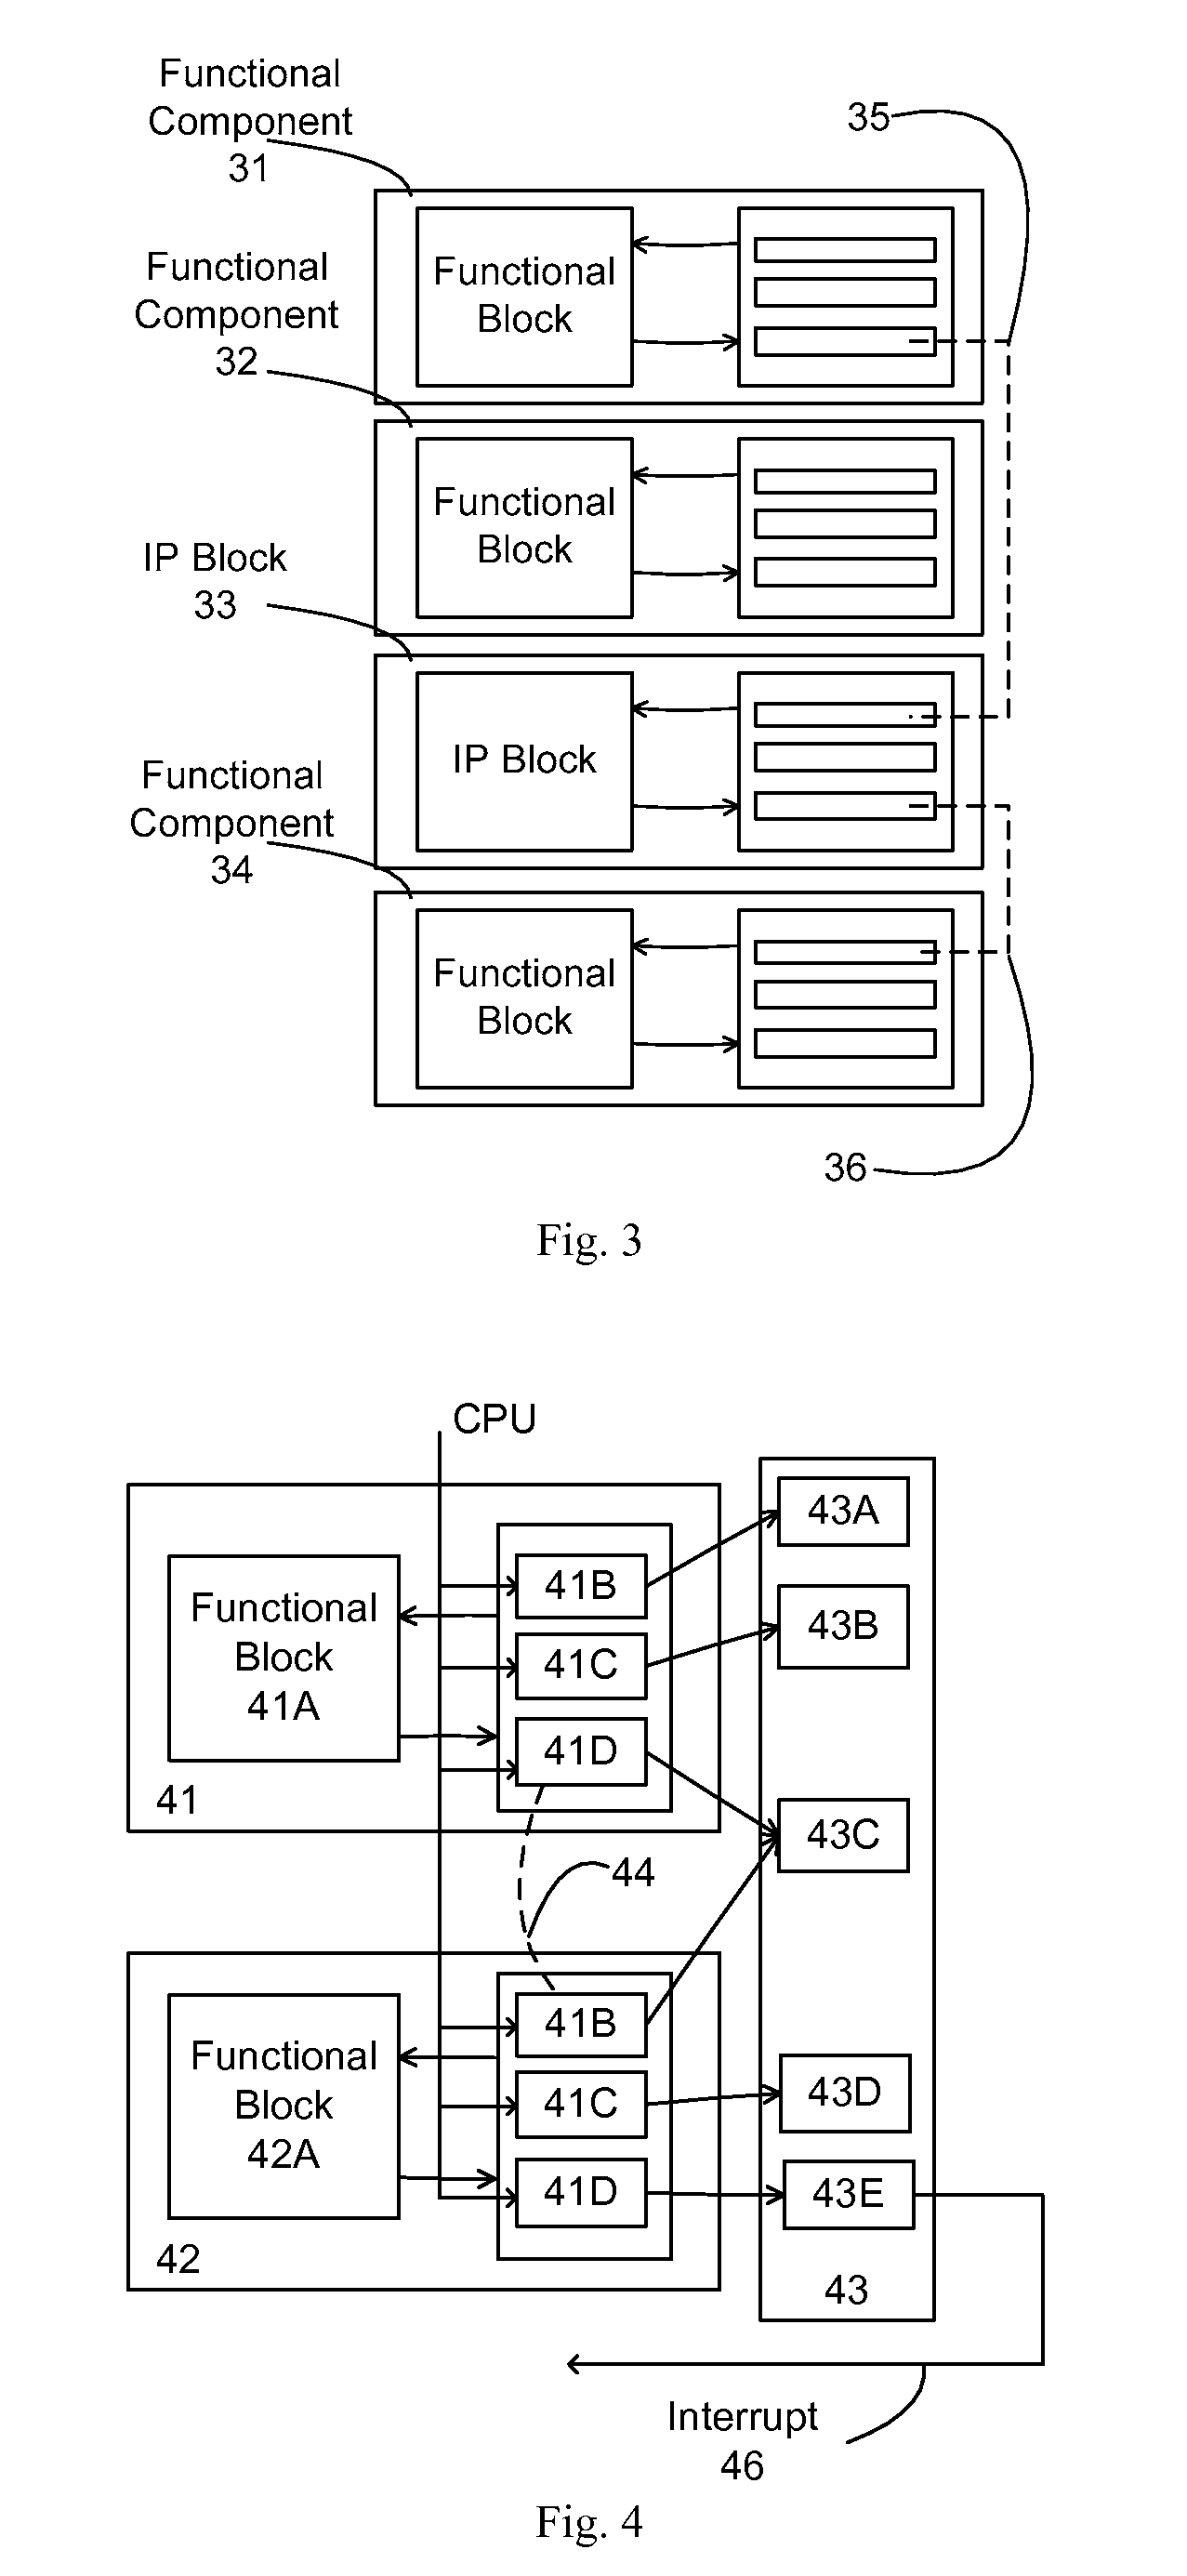 Soft-reconfigurable massively parallel architecture and programming system